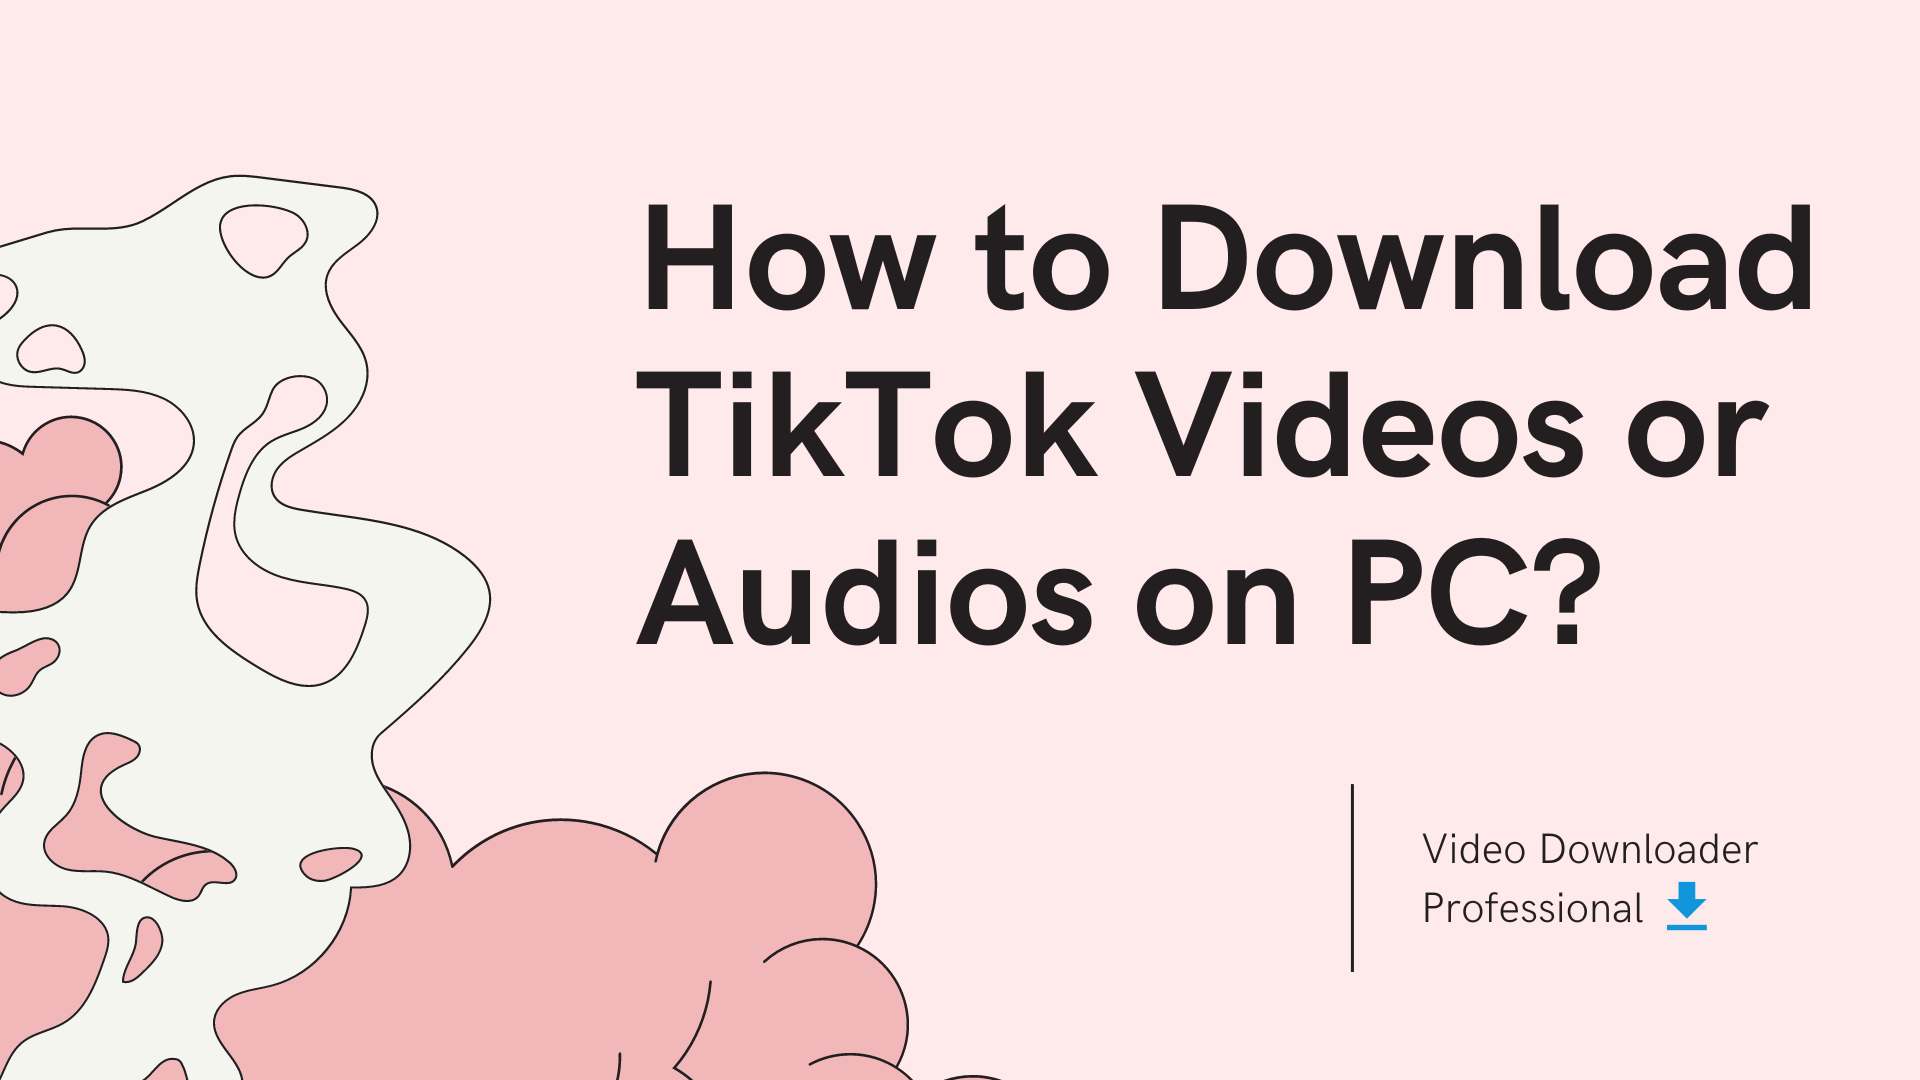 How to Download TikTok Videos or Audios on PC?